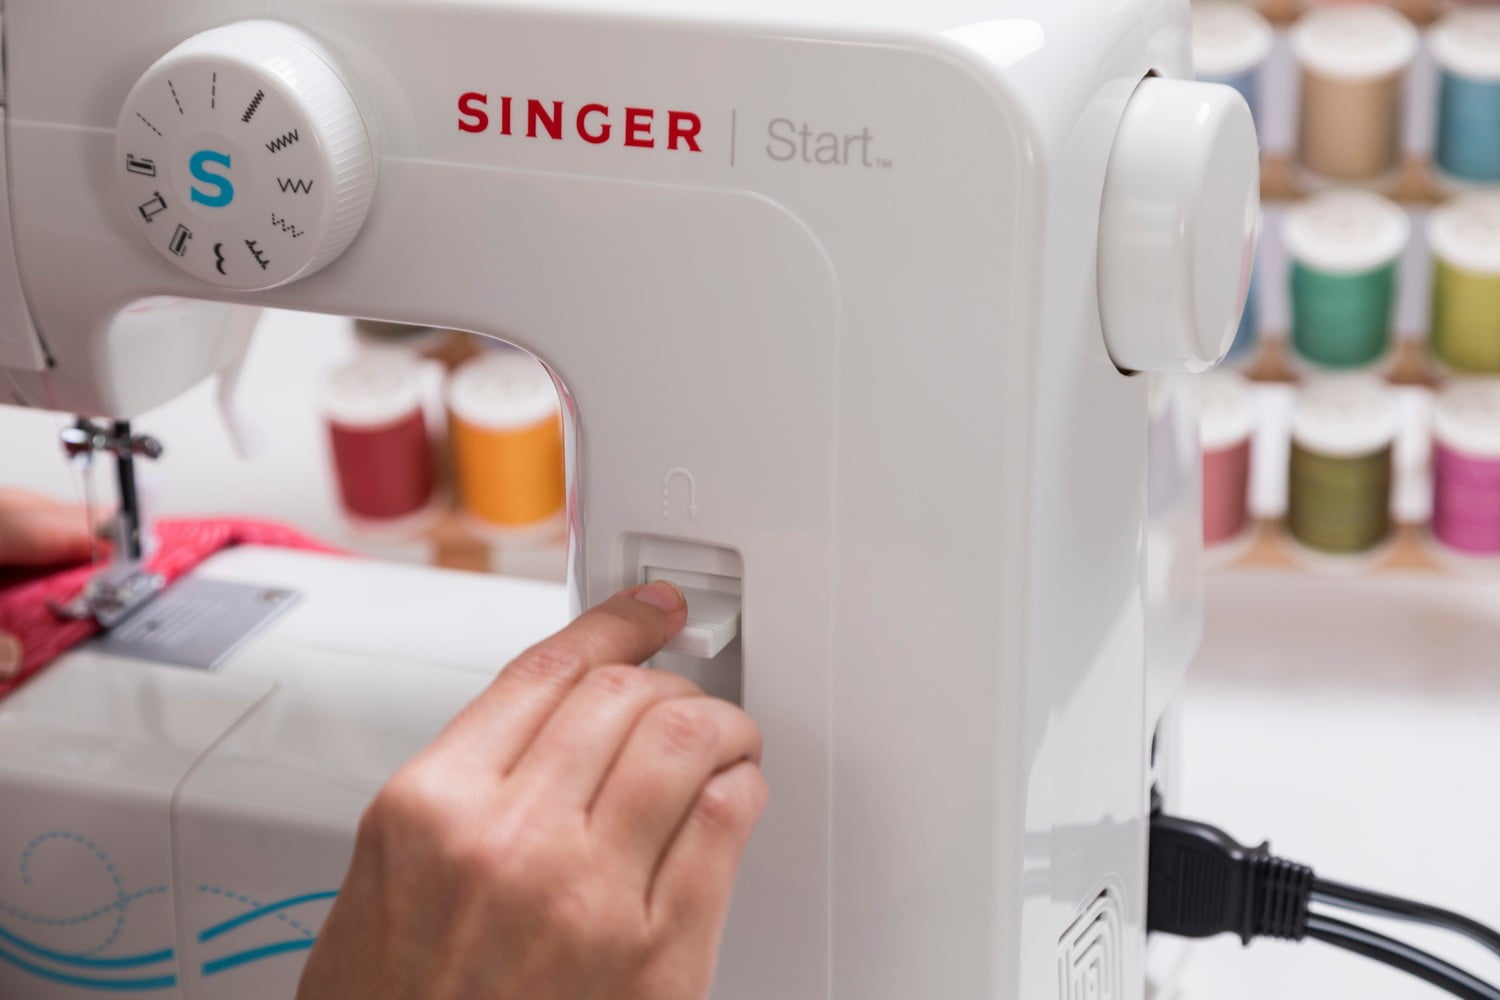  SINGER  Start 1304 Sewing Machine with 6 Built-in Stitches,  Free Arm Sewing Machine - Best Sewing Machine for Beginners : Arts, Crafts  & Sewing